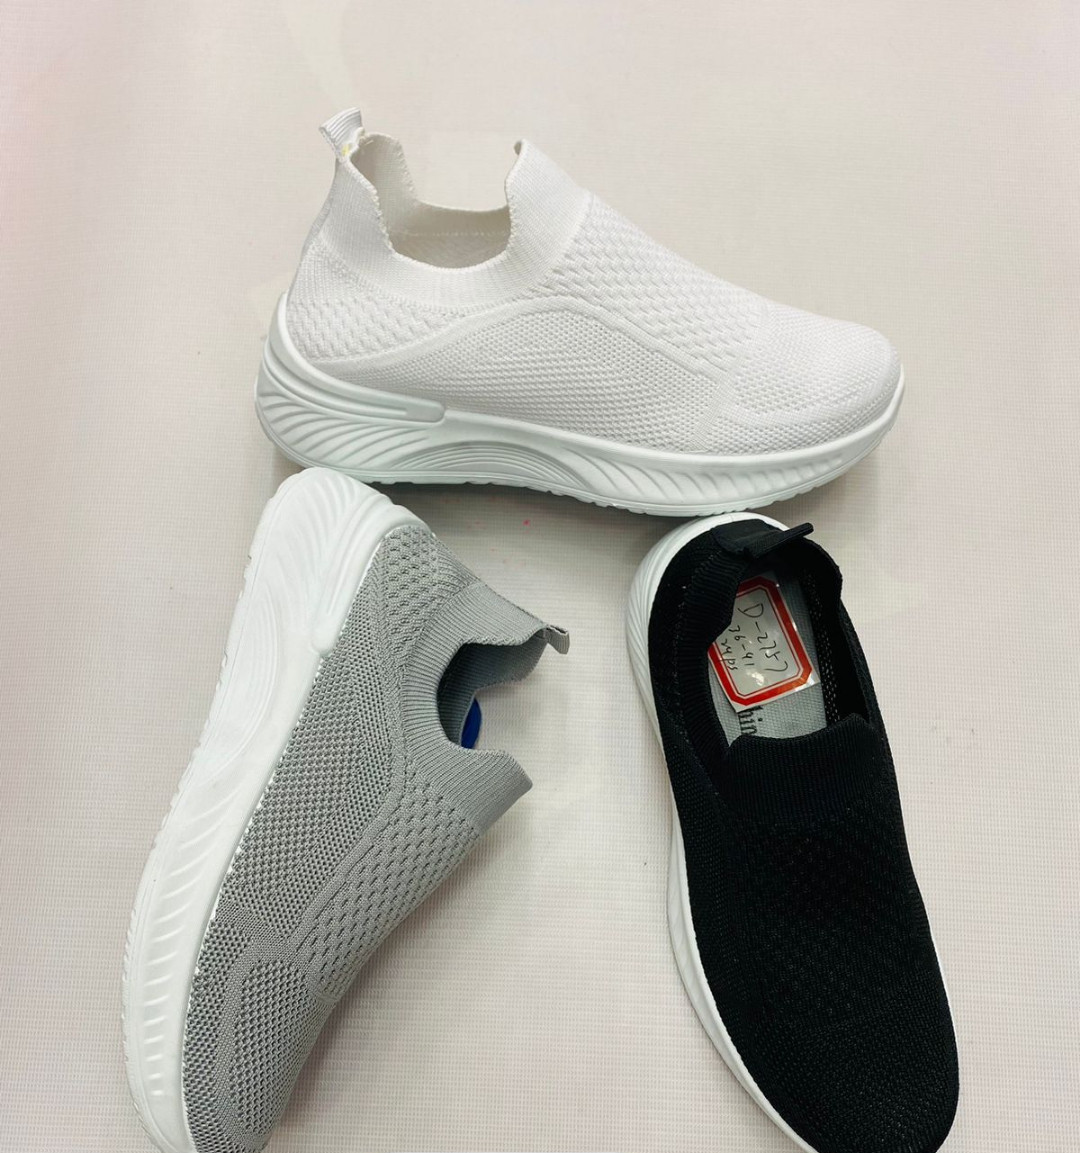 High-end breathable sponge cake Slip-On Shoes For Women and Girls Premium quality Fashion shoes Women White - Grey - Black (24 pairs in one BOX) Size 36 to 41